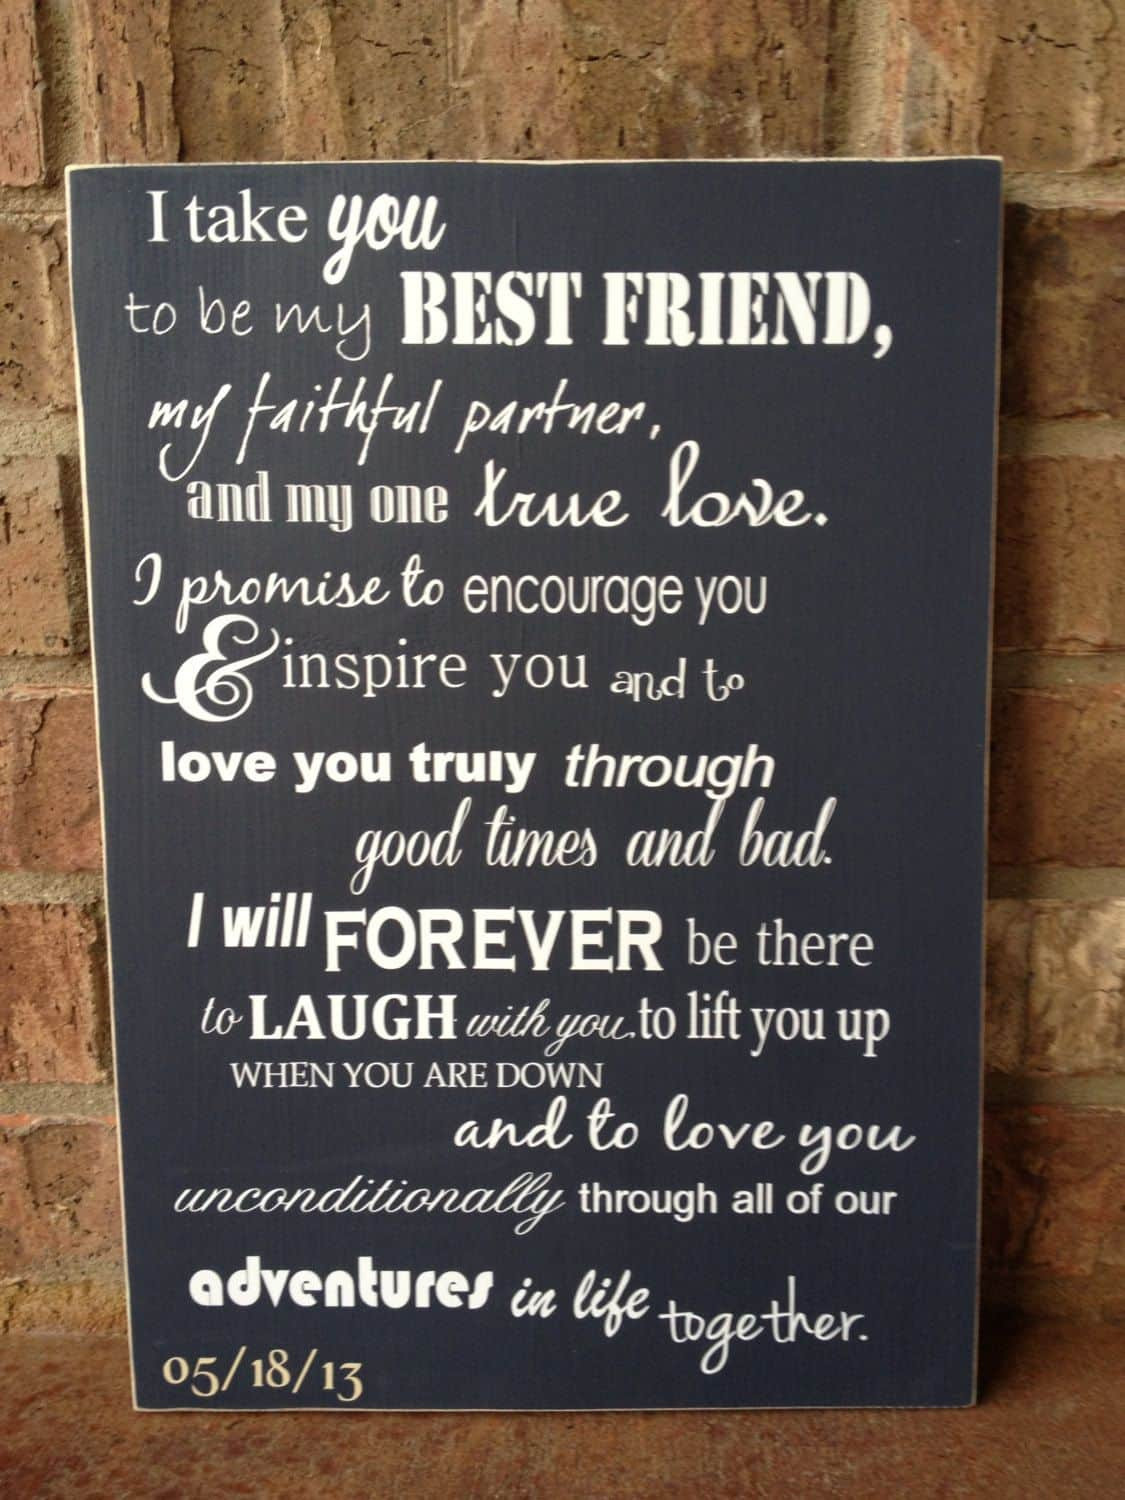 Personal Wedding Vows To Husband
 wedding vows to husband best photos Cute Wedding Ideas